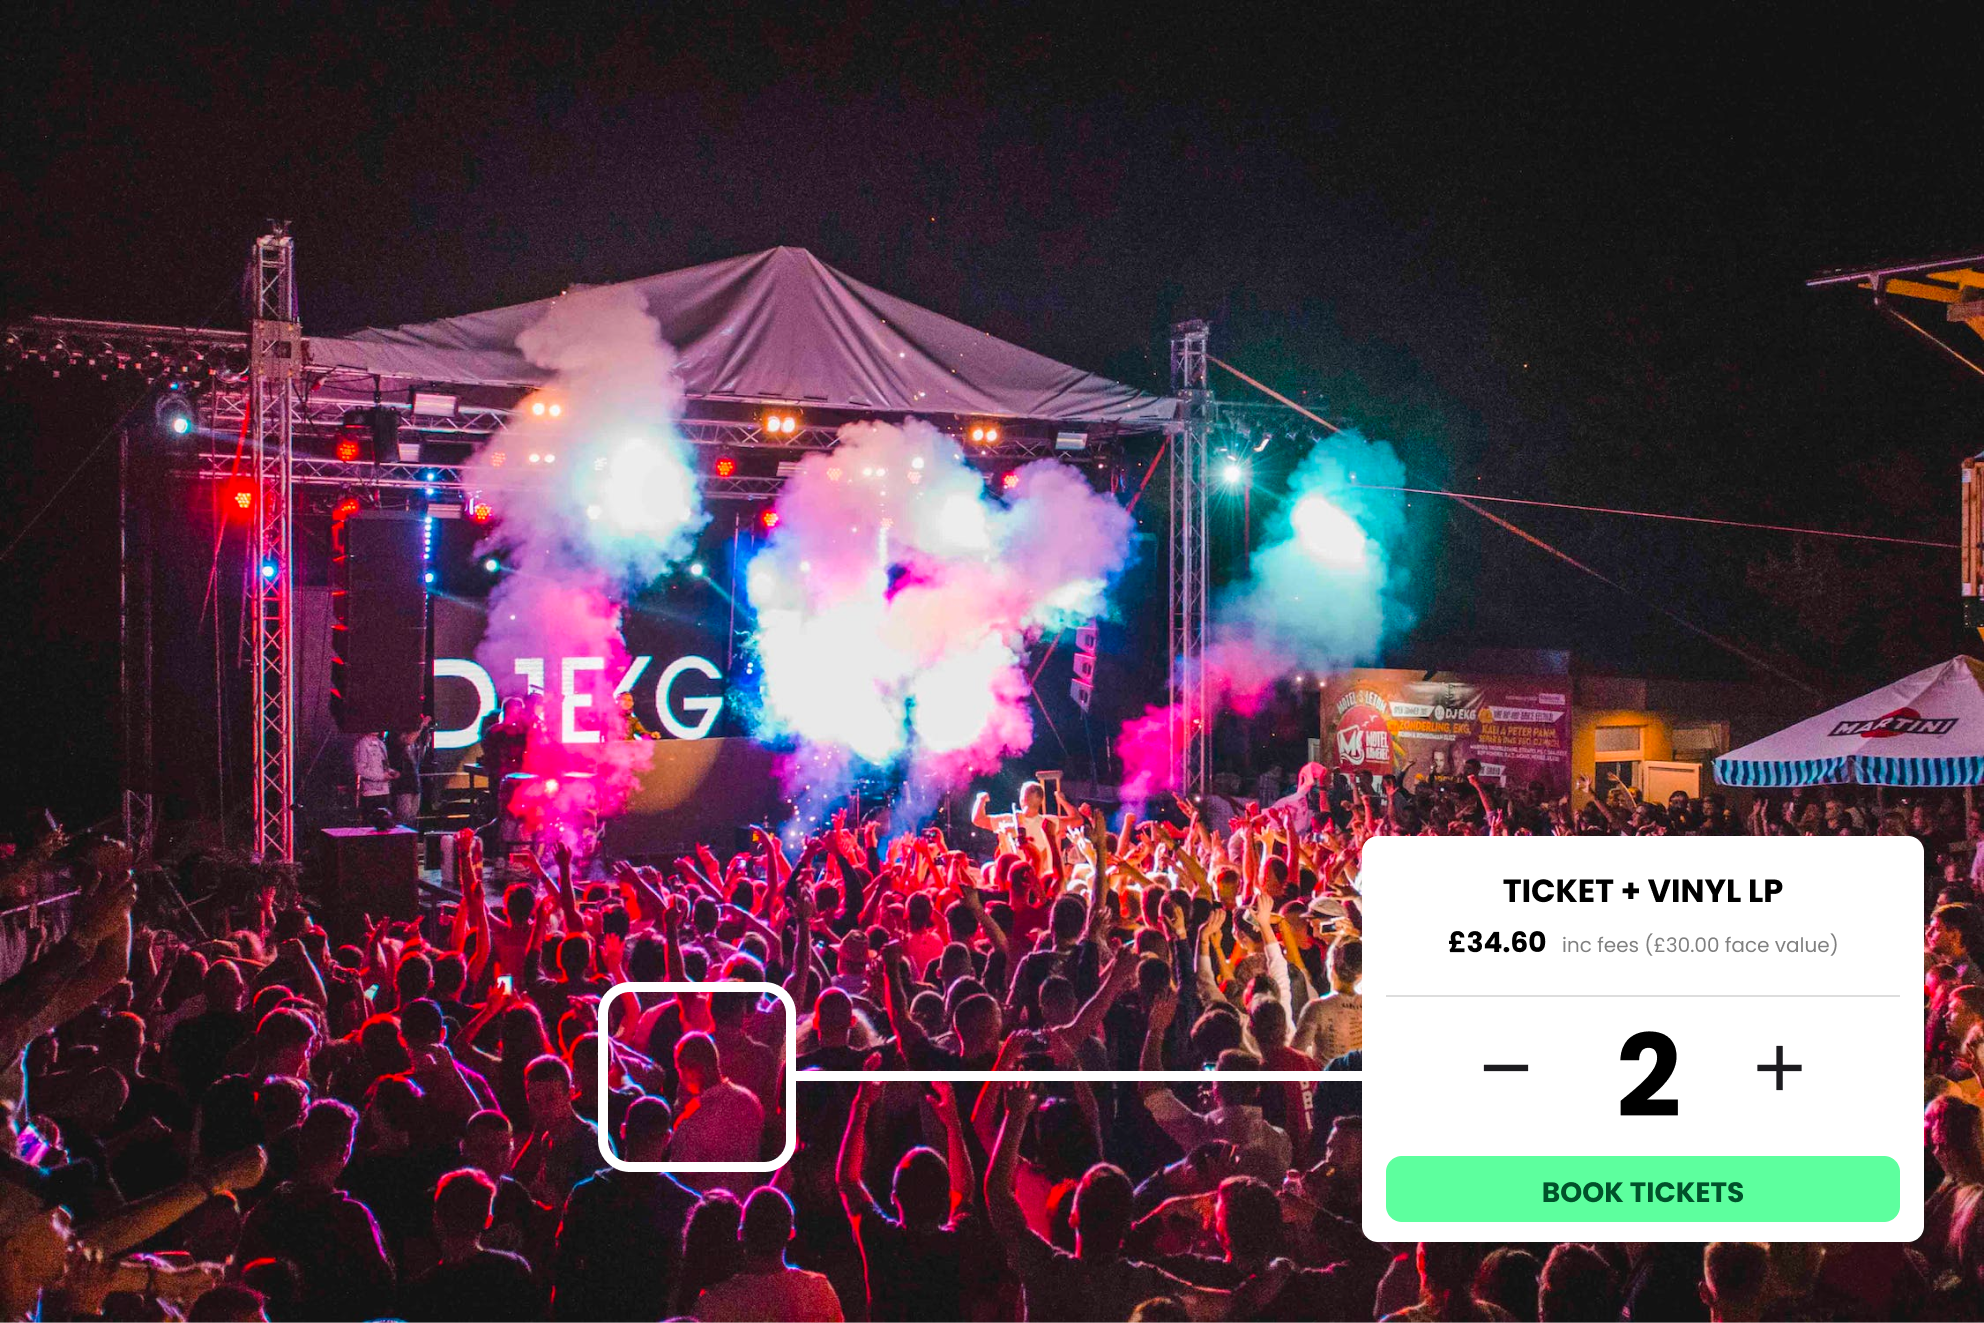 A crowd at a festival overlaid with a decorative mockup of Gigantic's ticket selection.